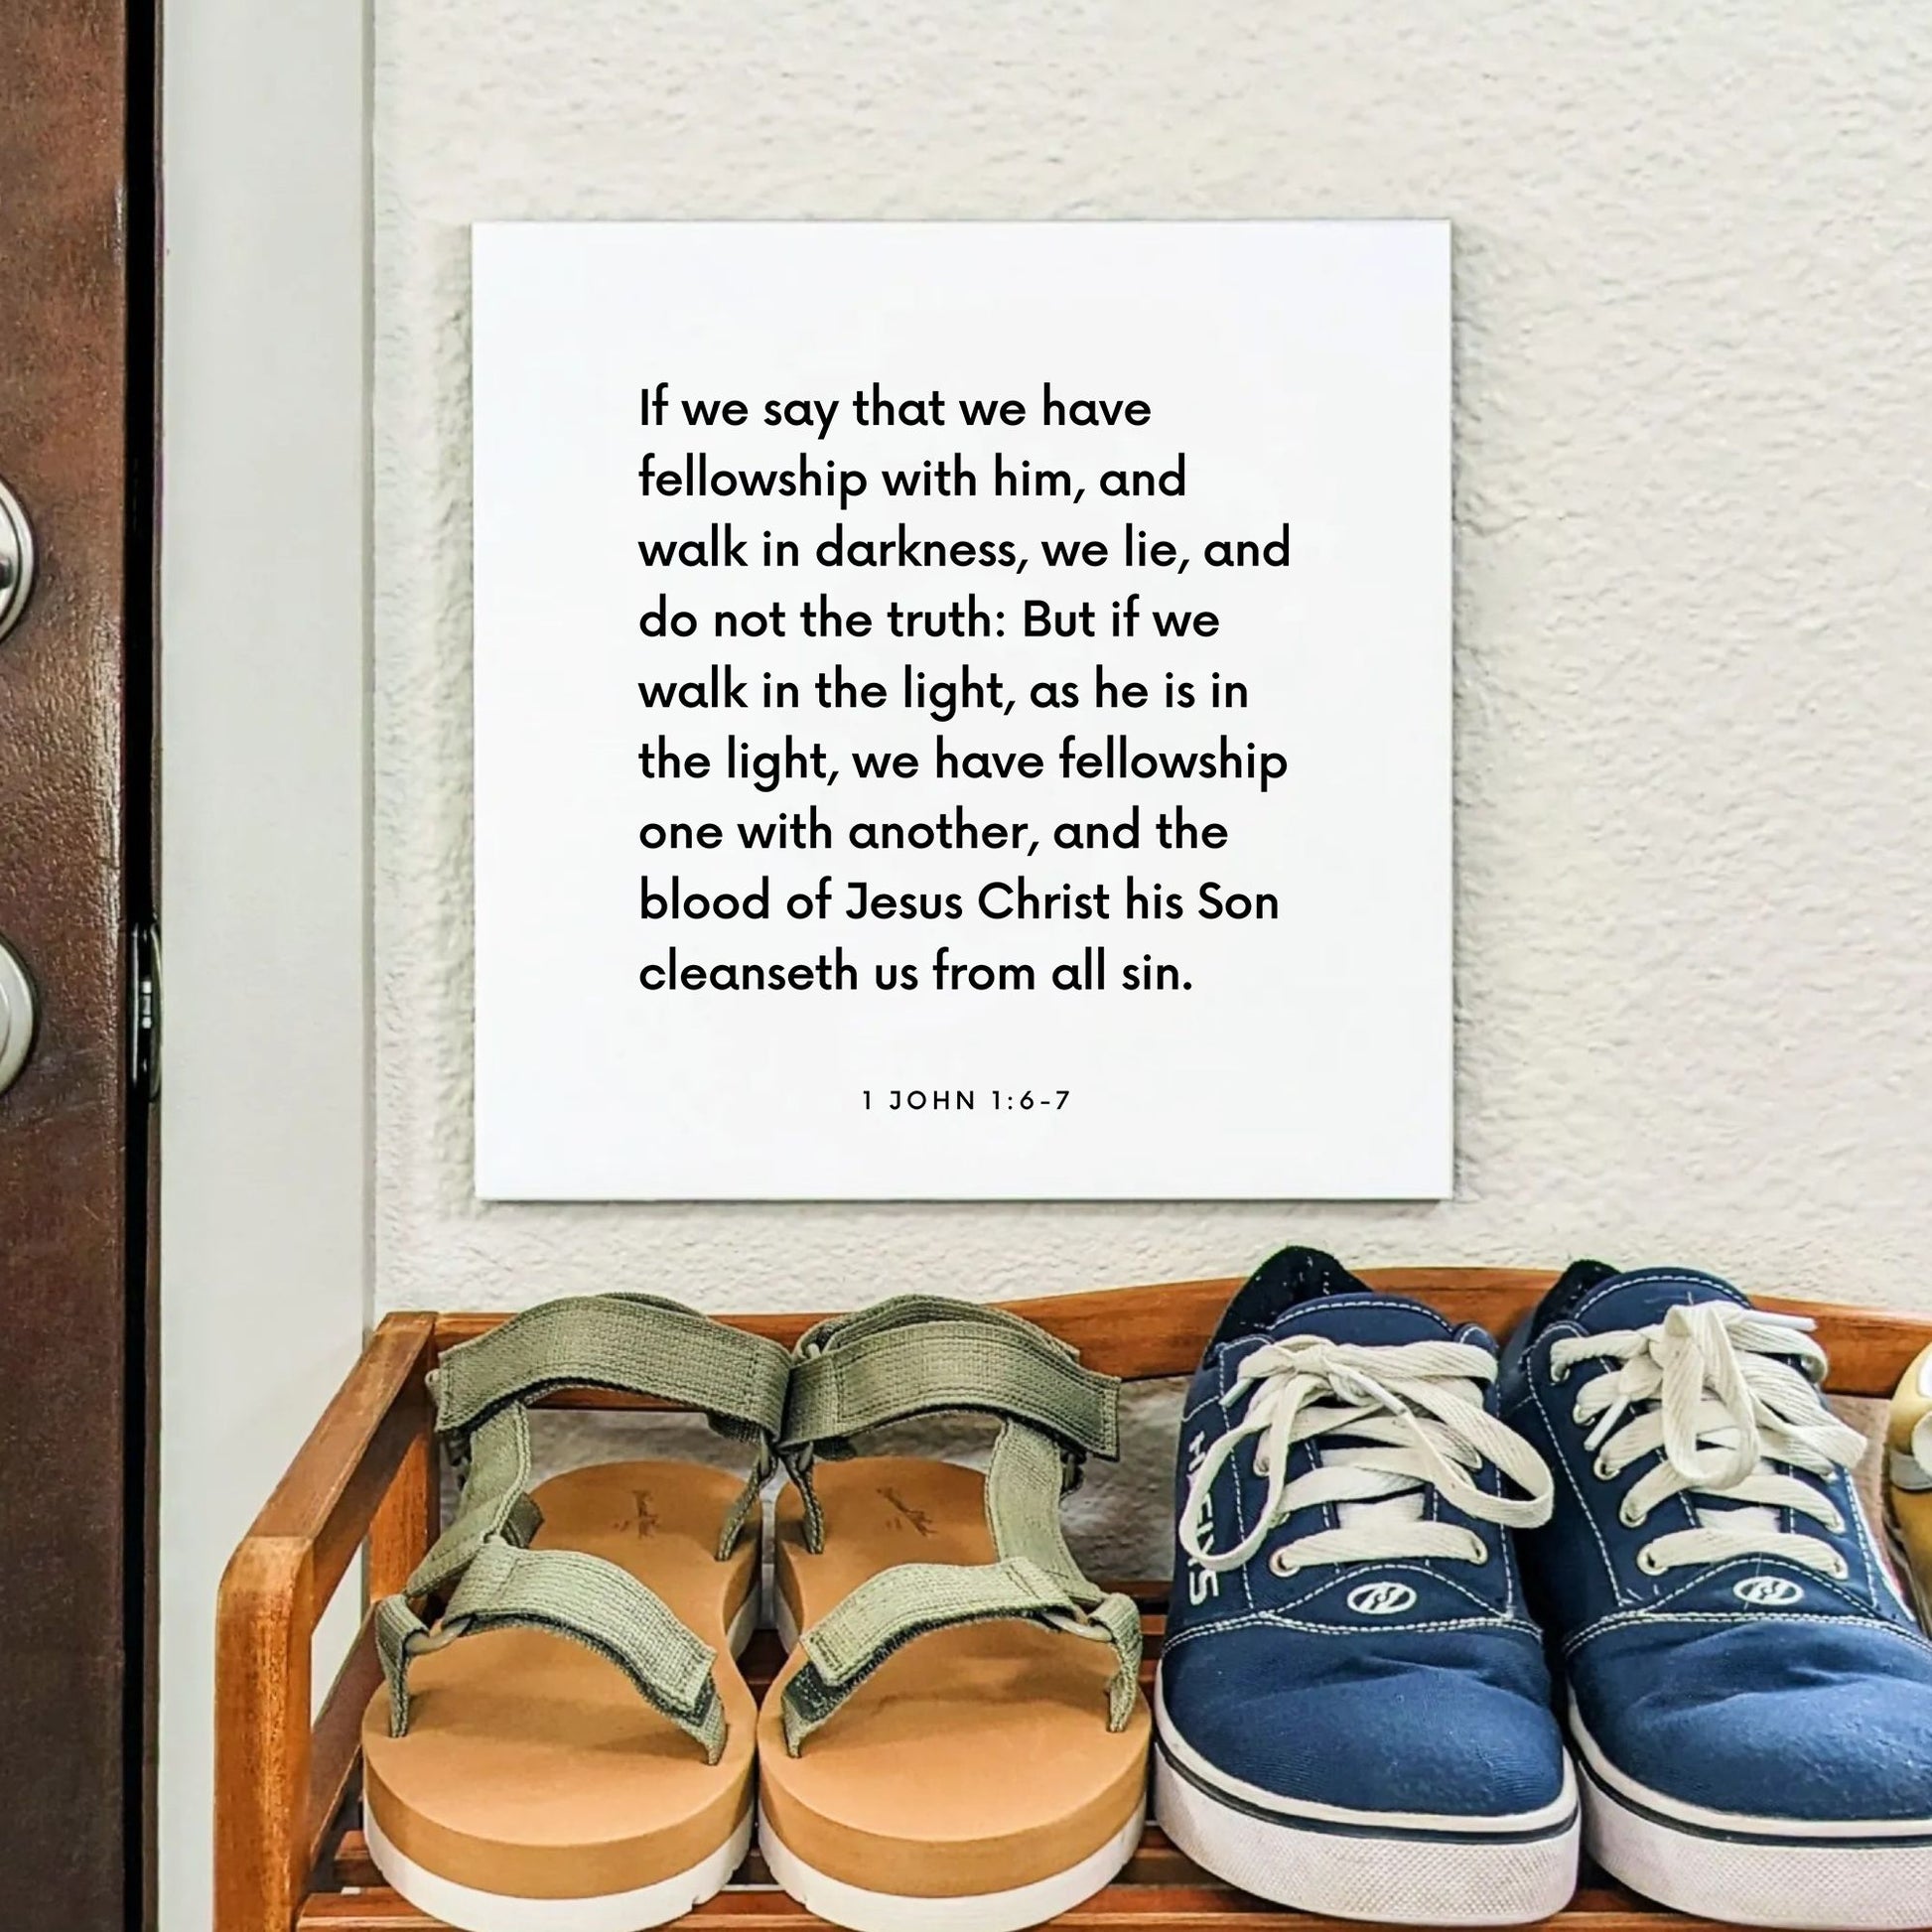 Shoes mouting of the scripture tile for 1 John 1:6-7 - "If we walk in the light, as he is in the light"